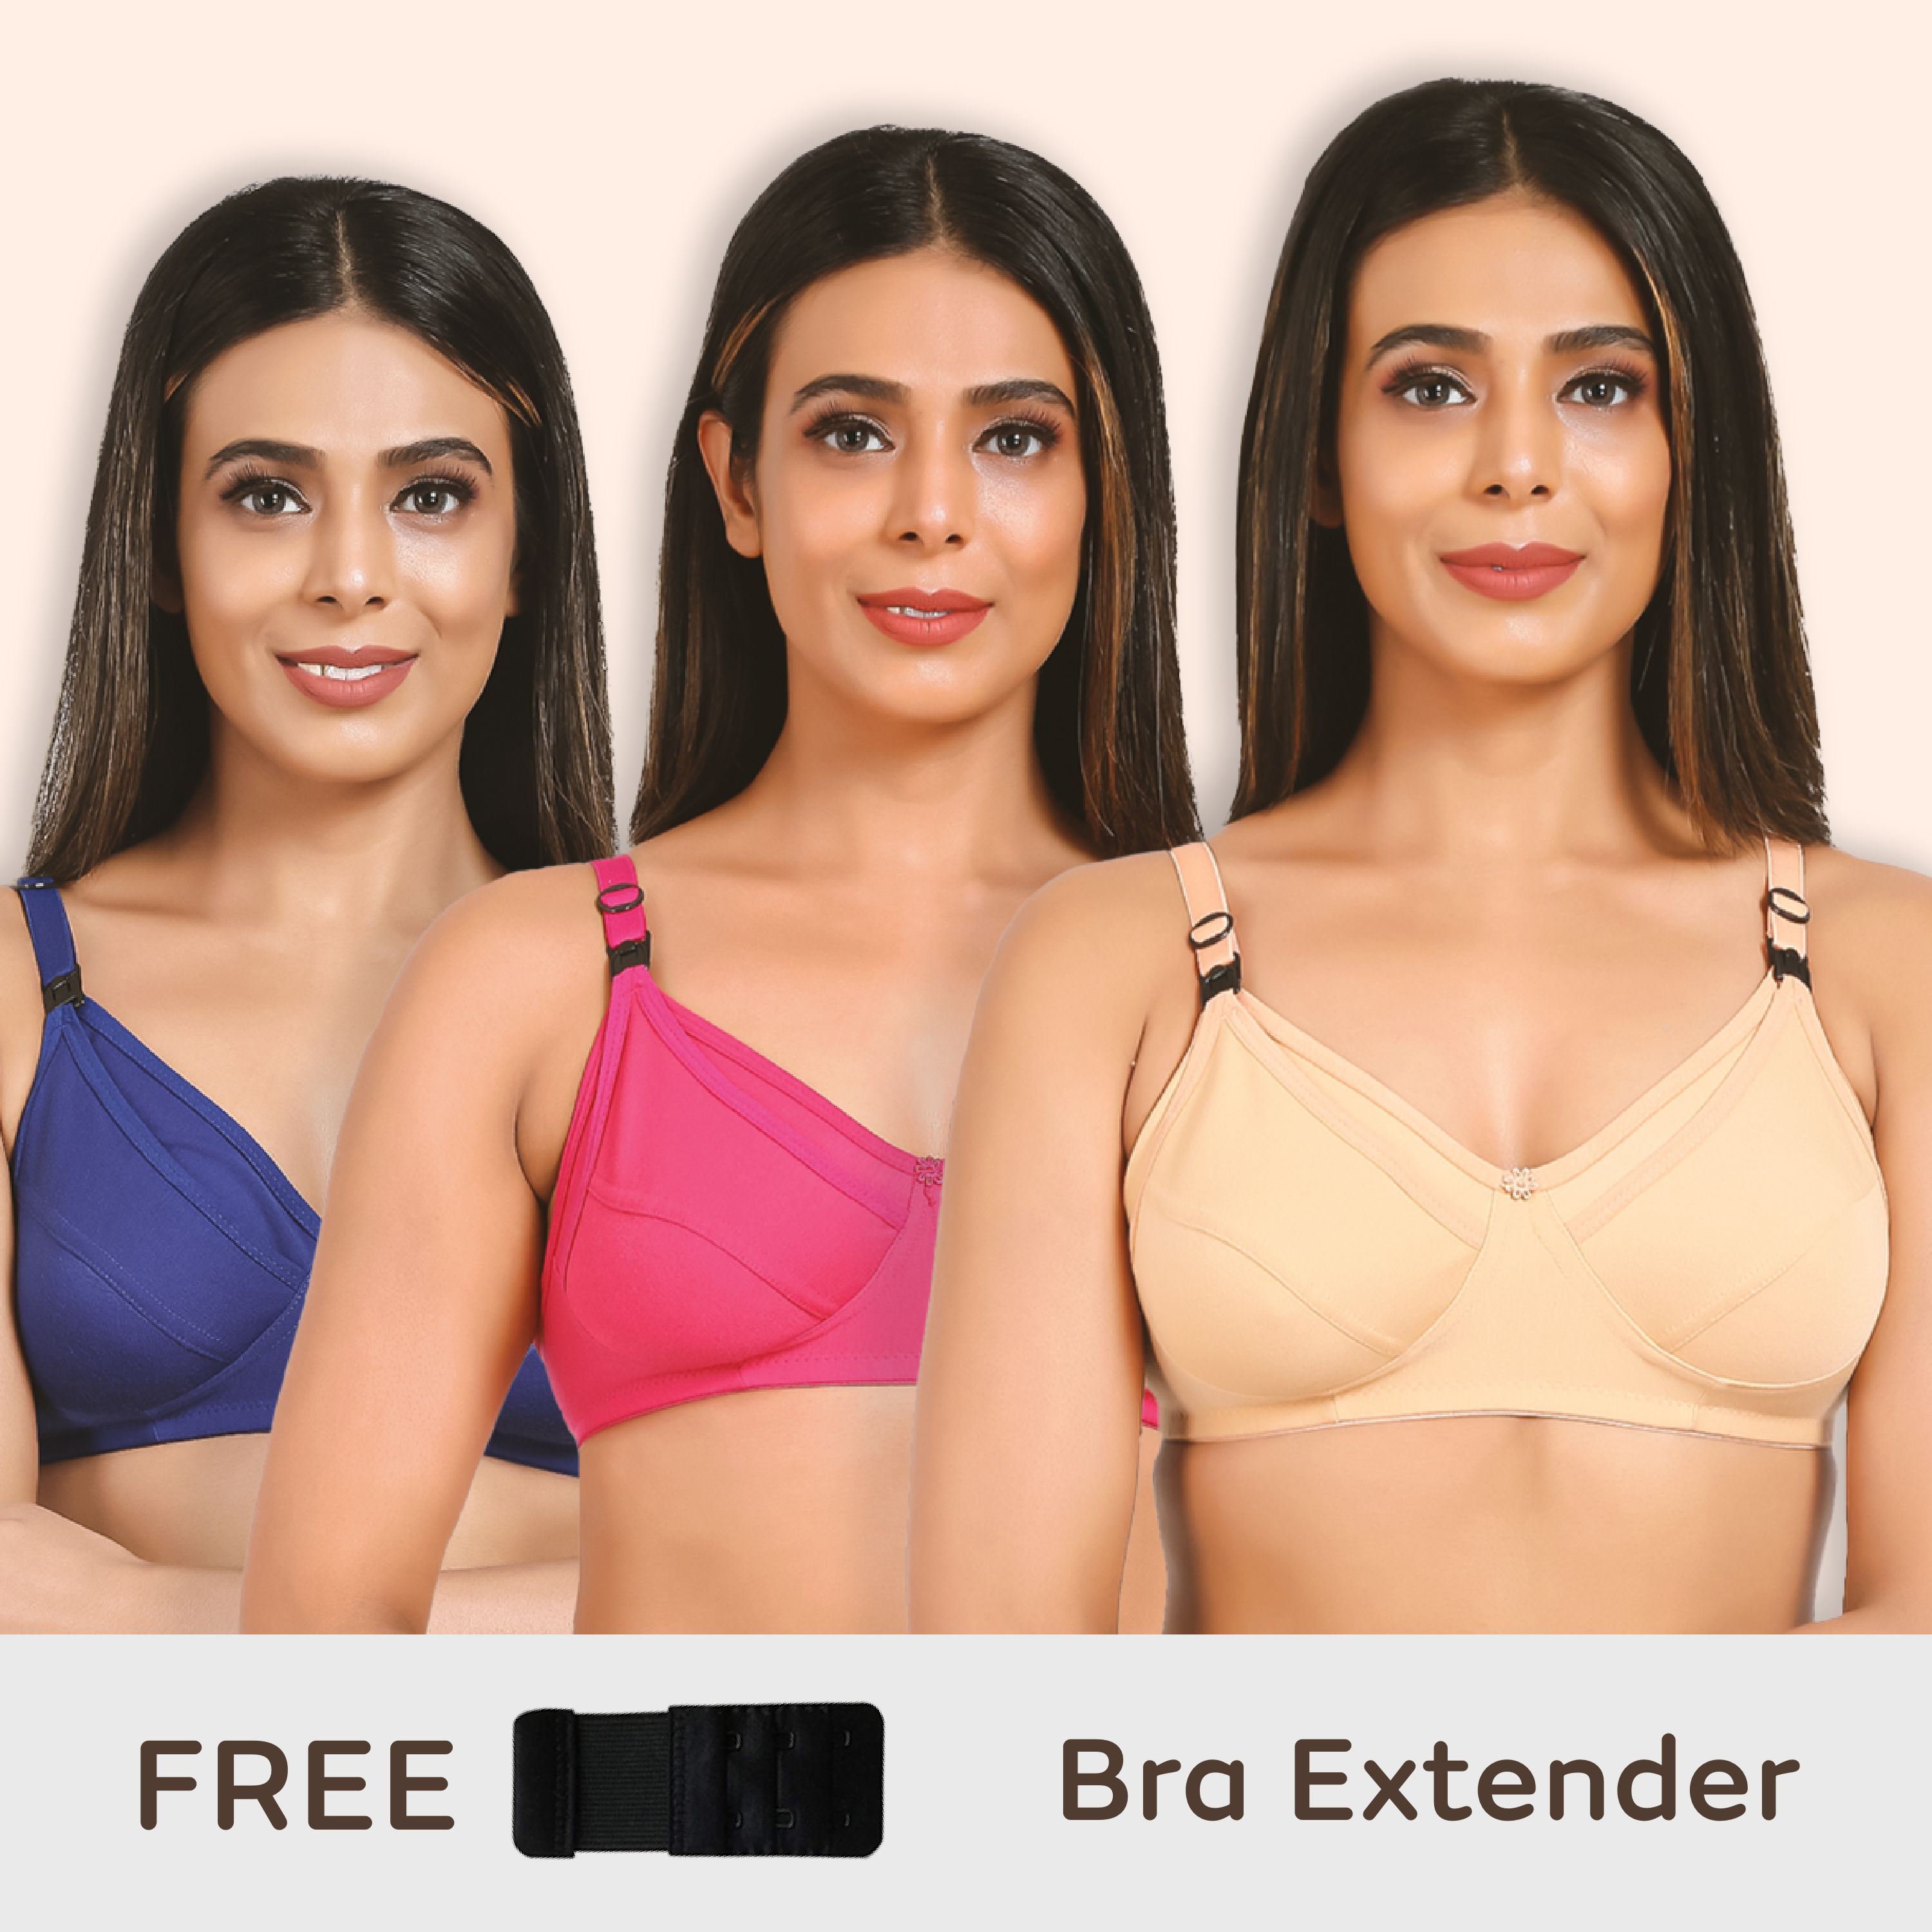 Maternity/Nursing Bras Non-Wired, Non-Padded - Pack of 3 with free Bra Extender (Sandalwood, Persian Blue & Dark pink) 40 B